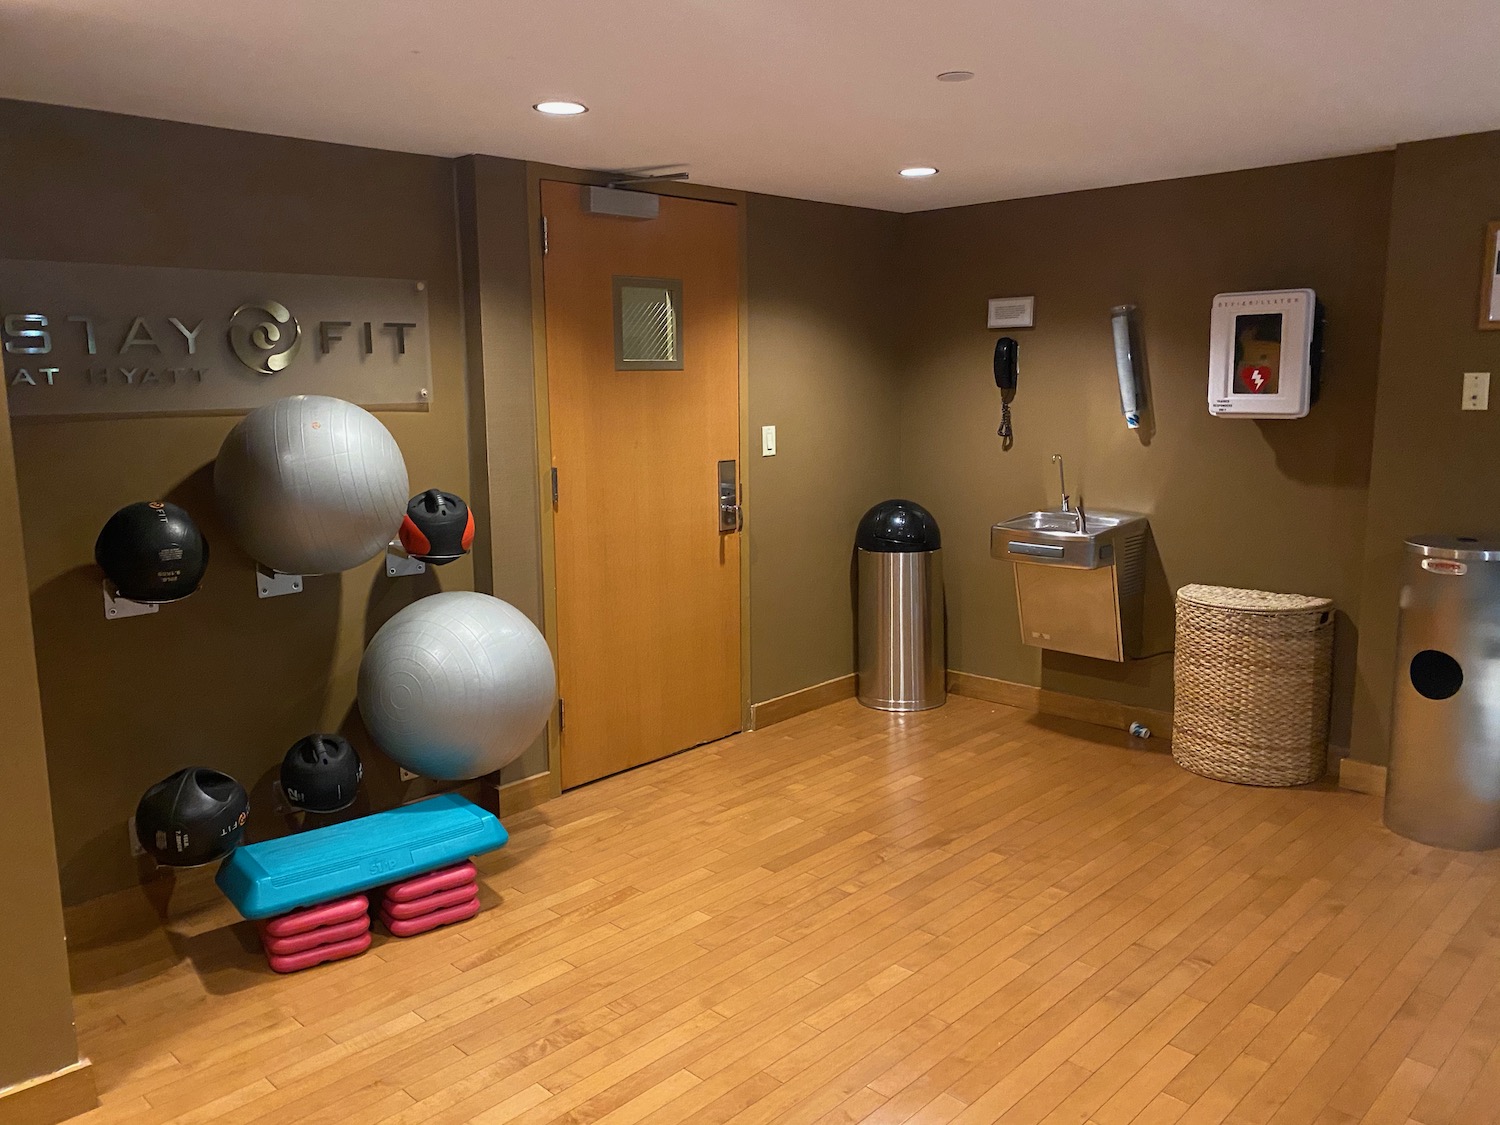 a room with a gym equipment